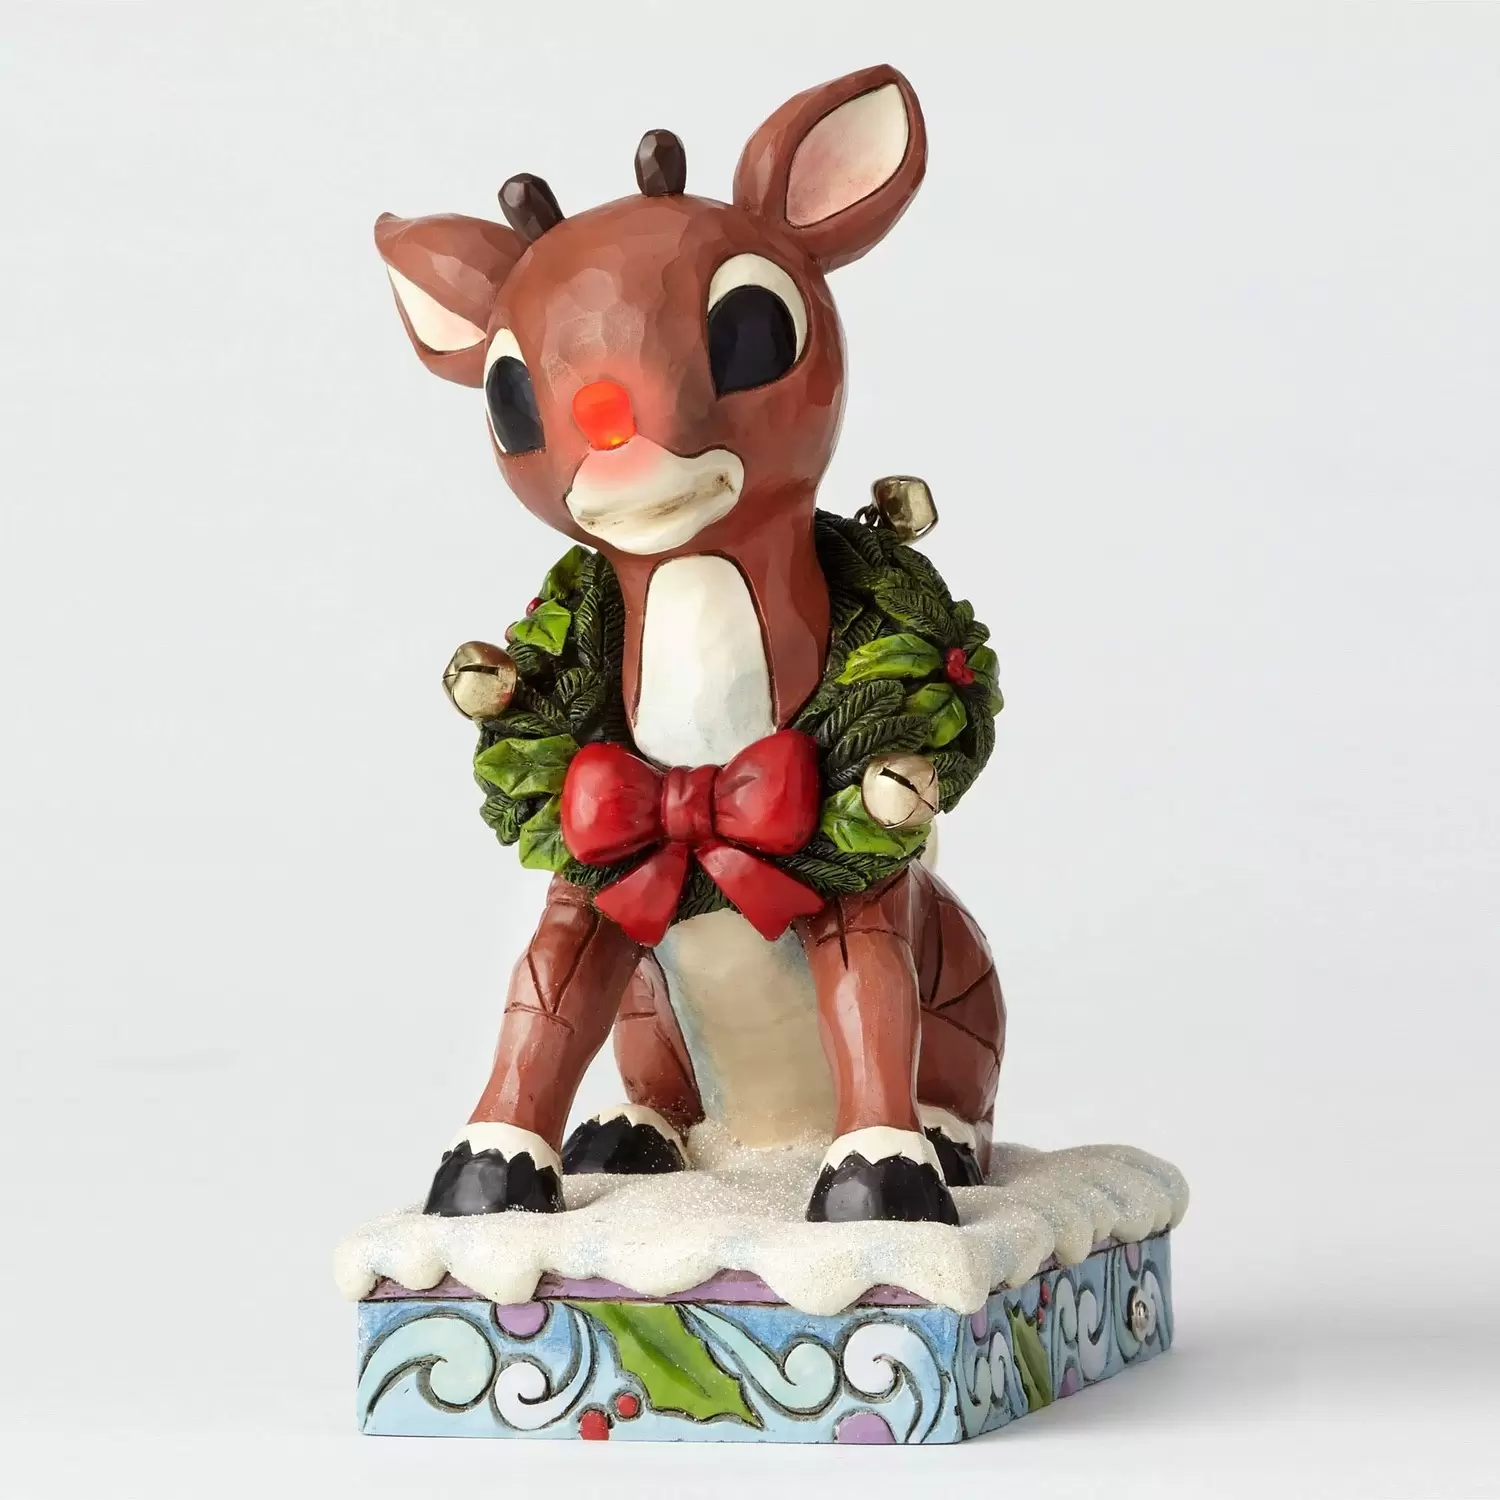 Cartoons Characters by Jim Shore - Lighted Rudolph with Wreath